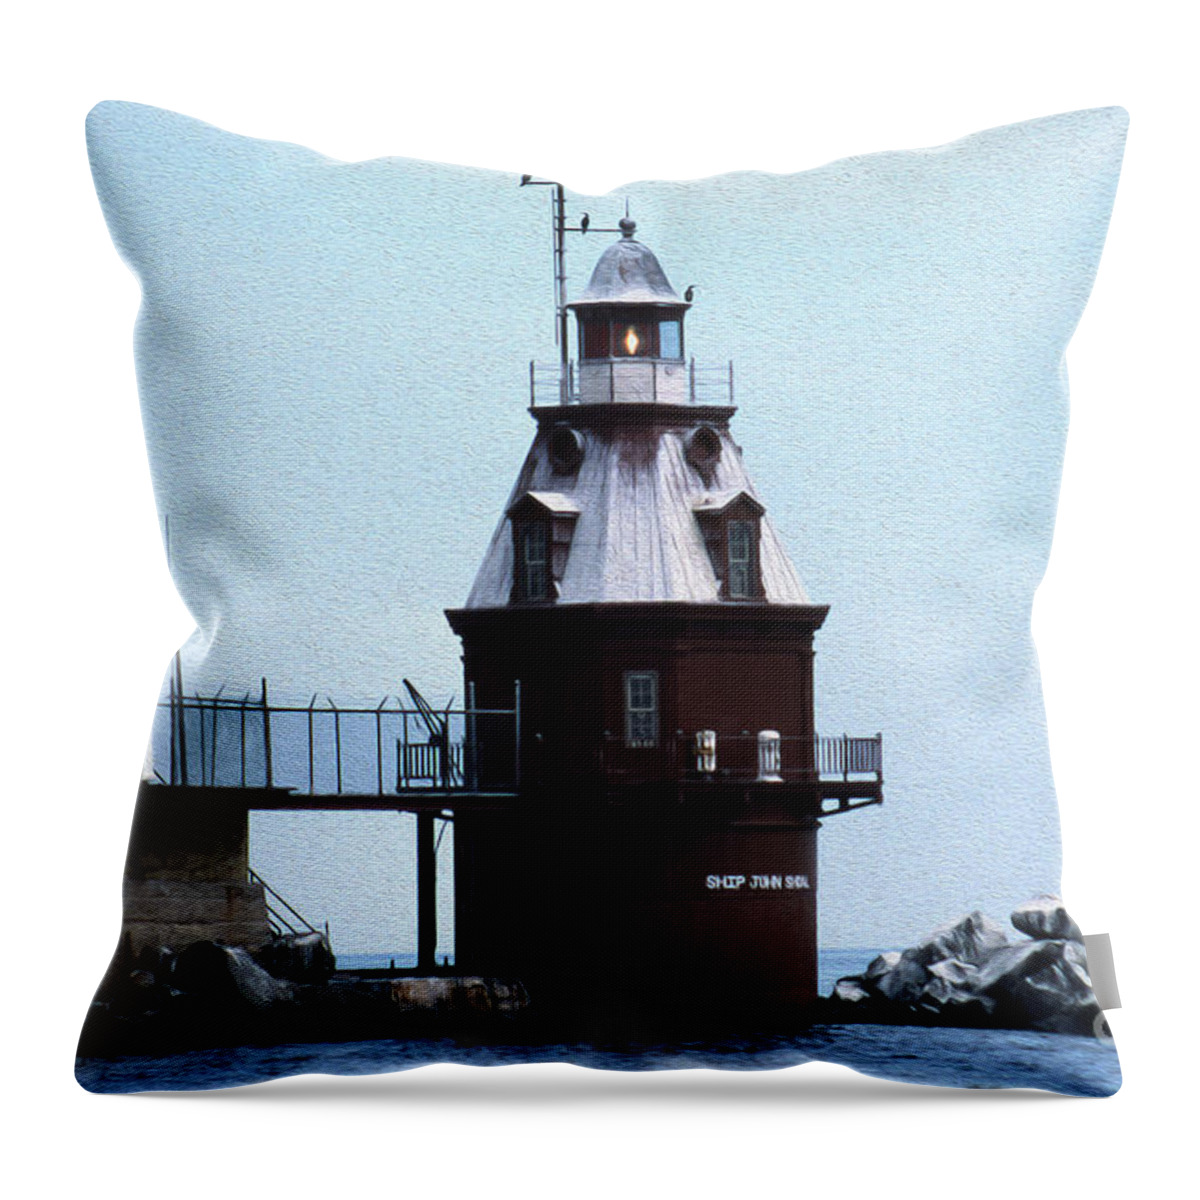 Lighthouses Throw Pillow featuring the photograph Painted Ship John Lighthouse Nj by Skip Willits